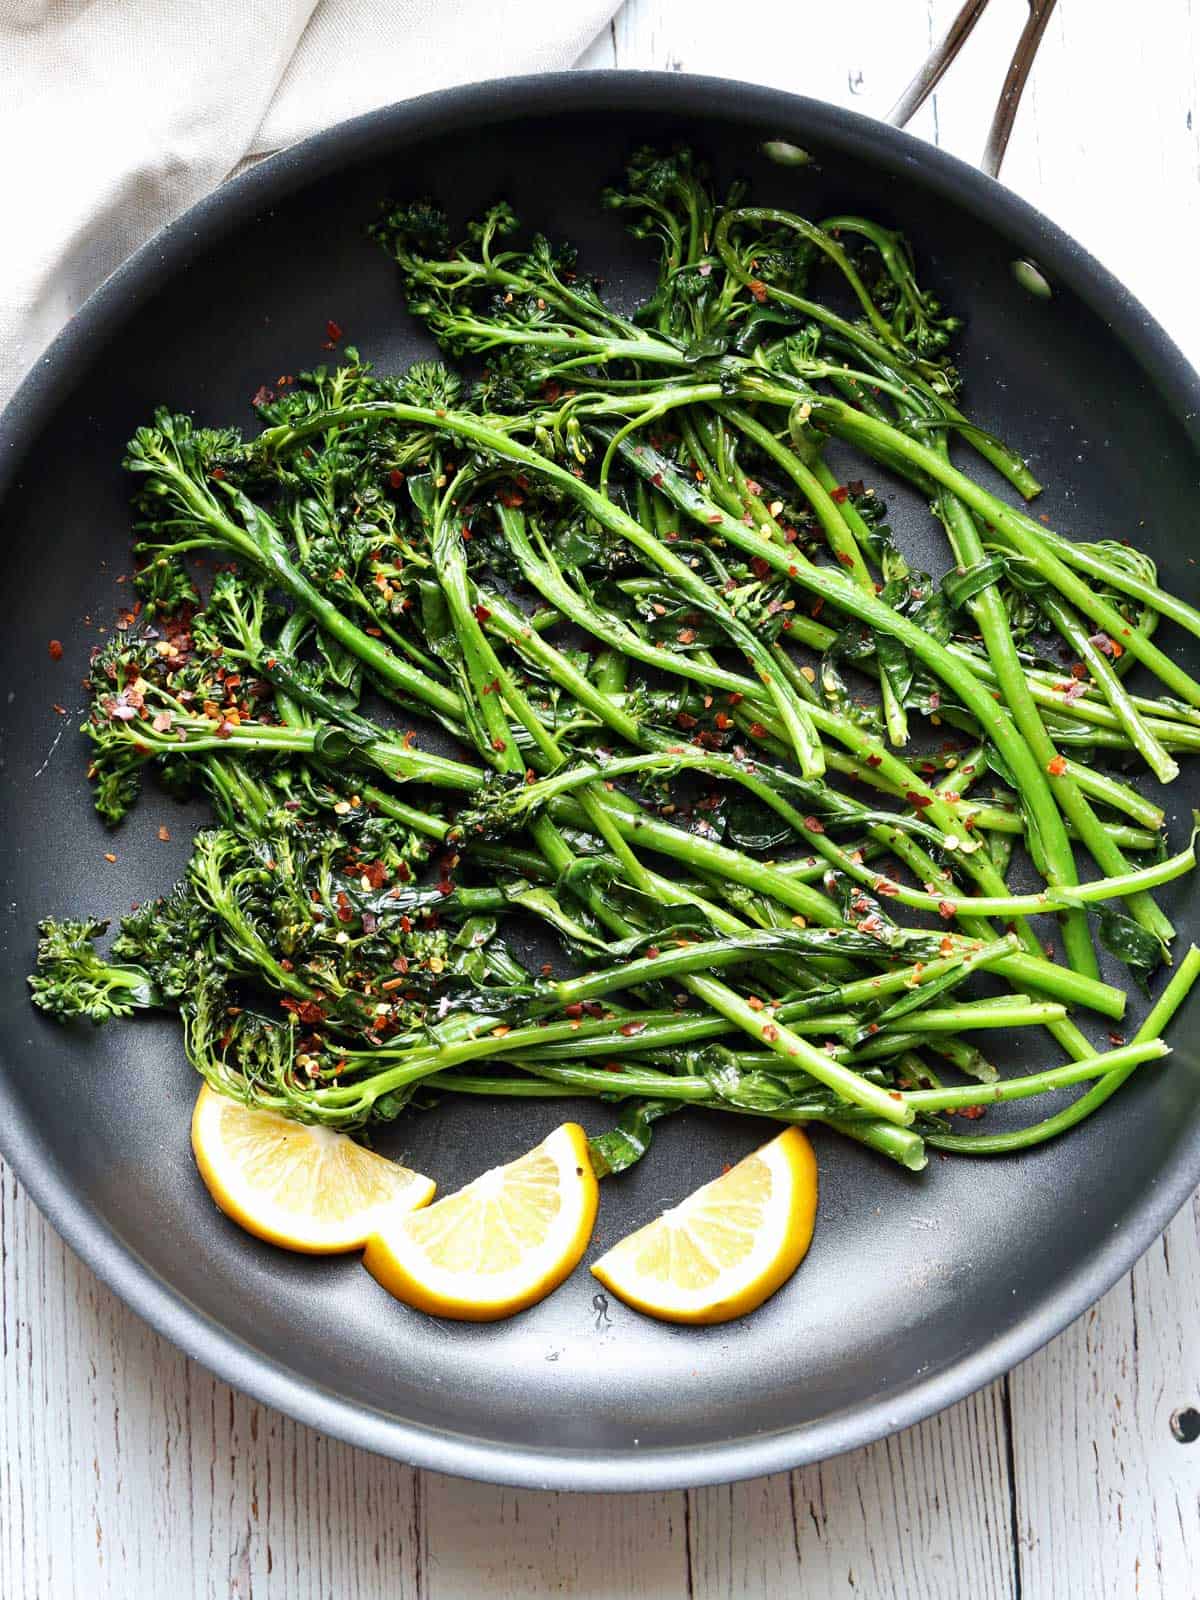 Sauteed broccolini served with lemon slices.